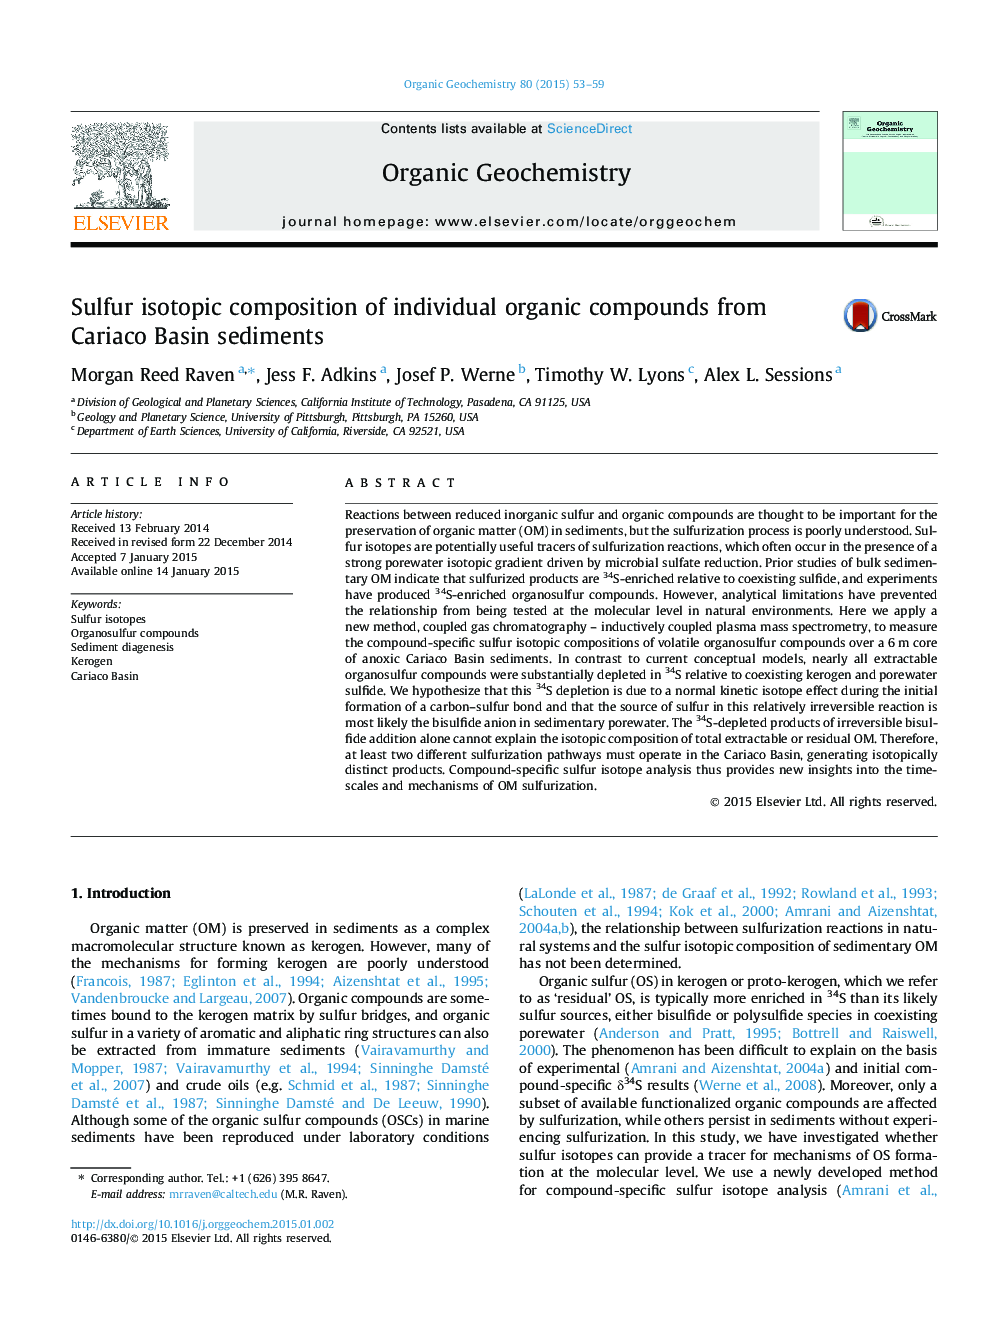 Sulfur isotopic composition of individual organic compounds from Cariaco Basin sediments